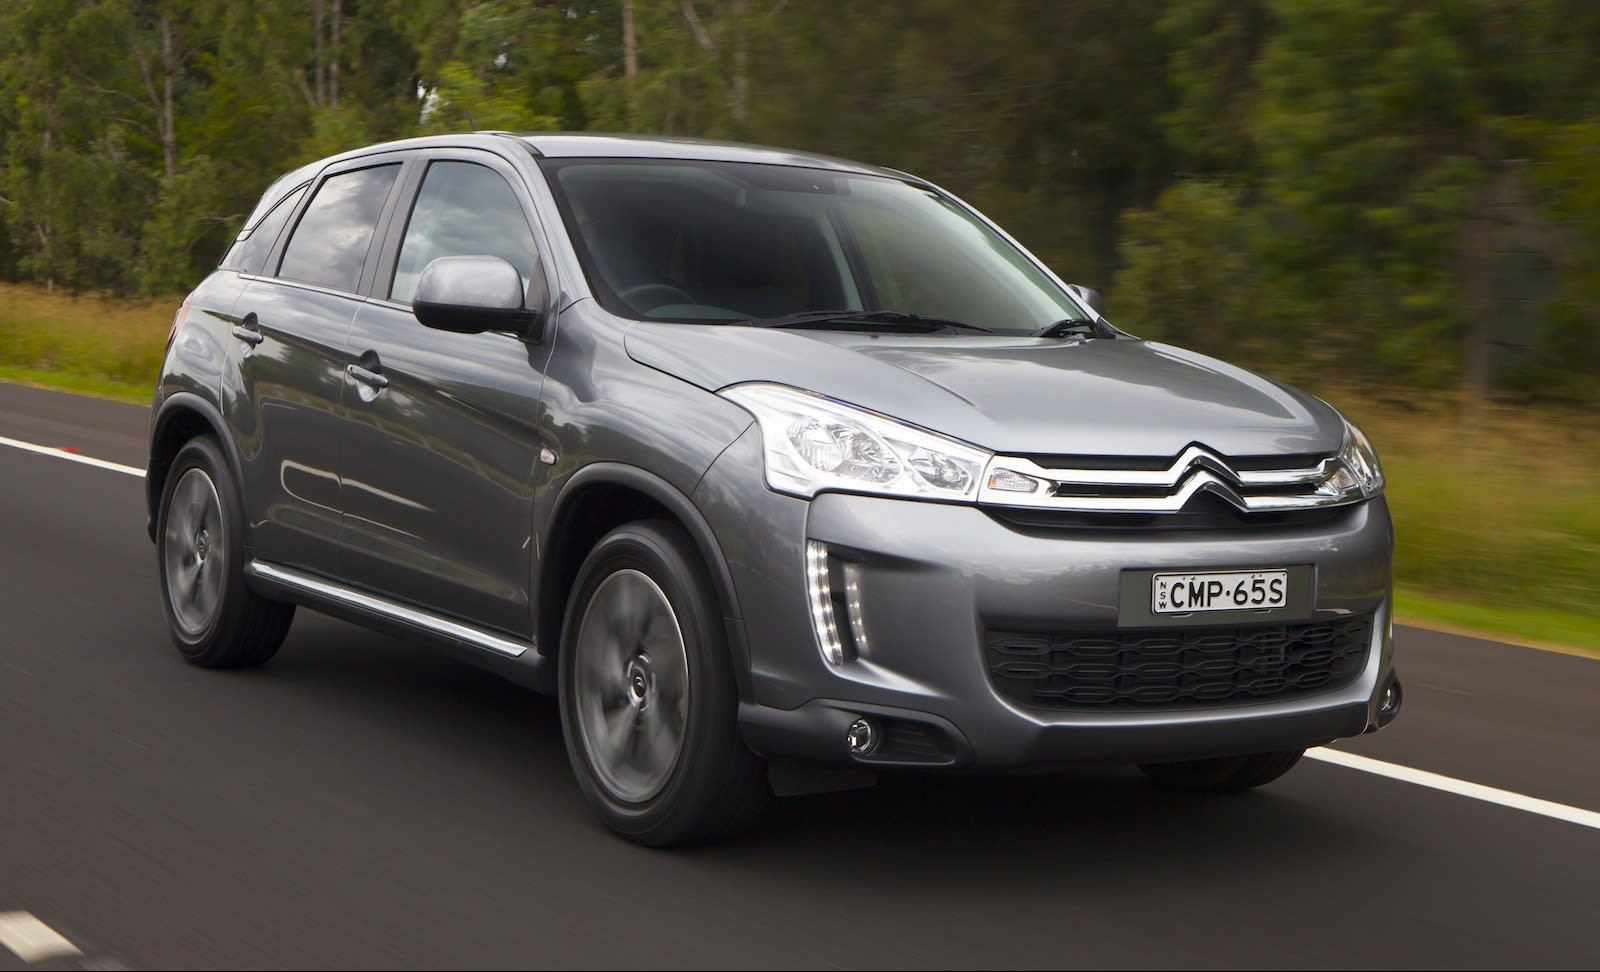 Citroen News - Page 16 of 22 - Drive